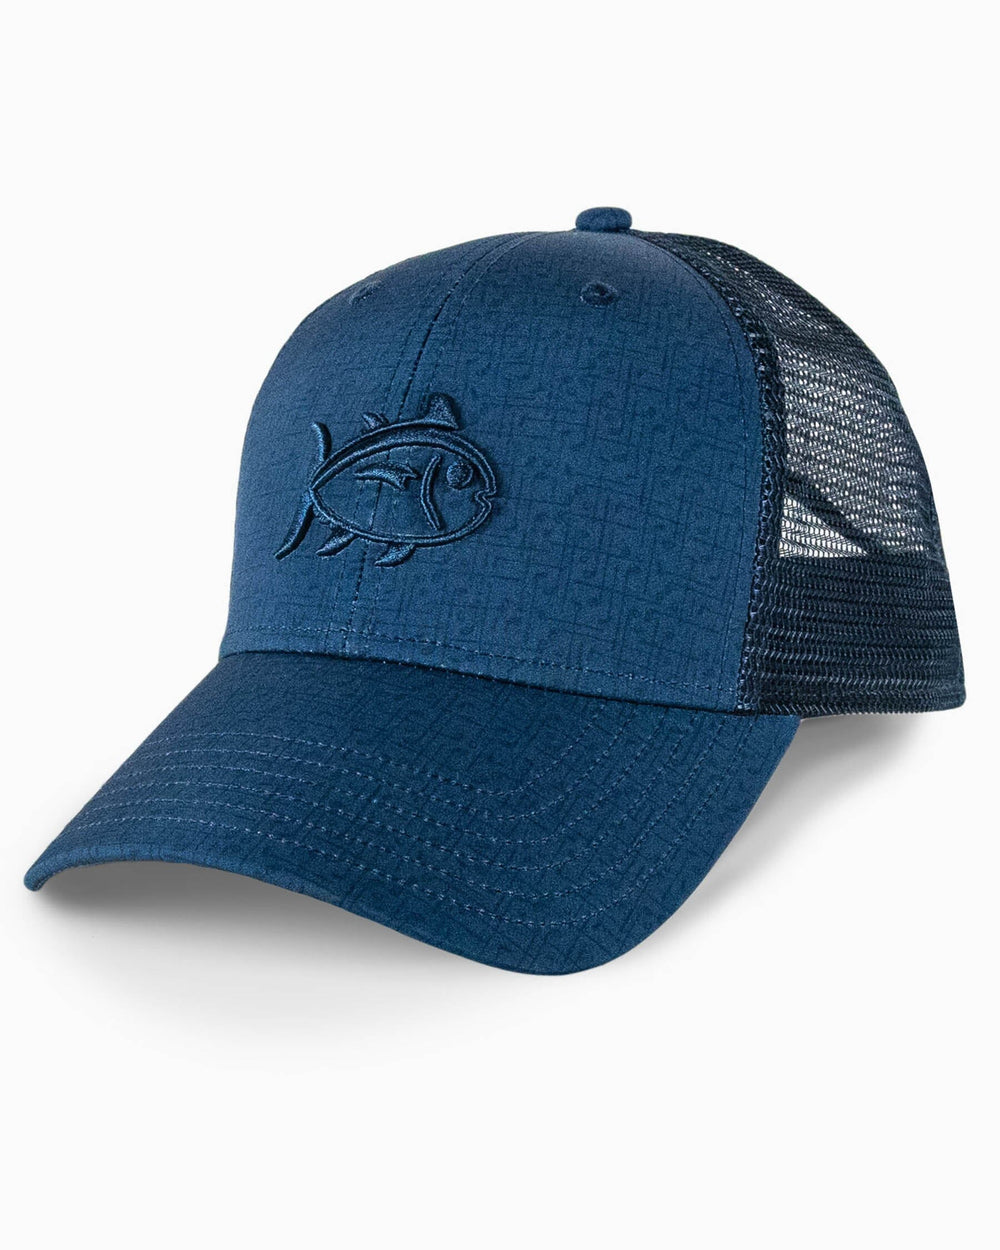 The front view of the Southern Tide Over Clubbin' Print Performance Trucker by Southern Tide - Navy